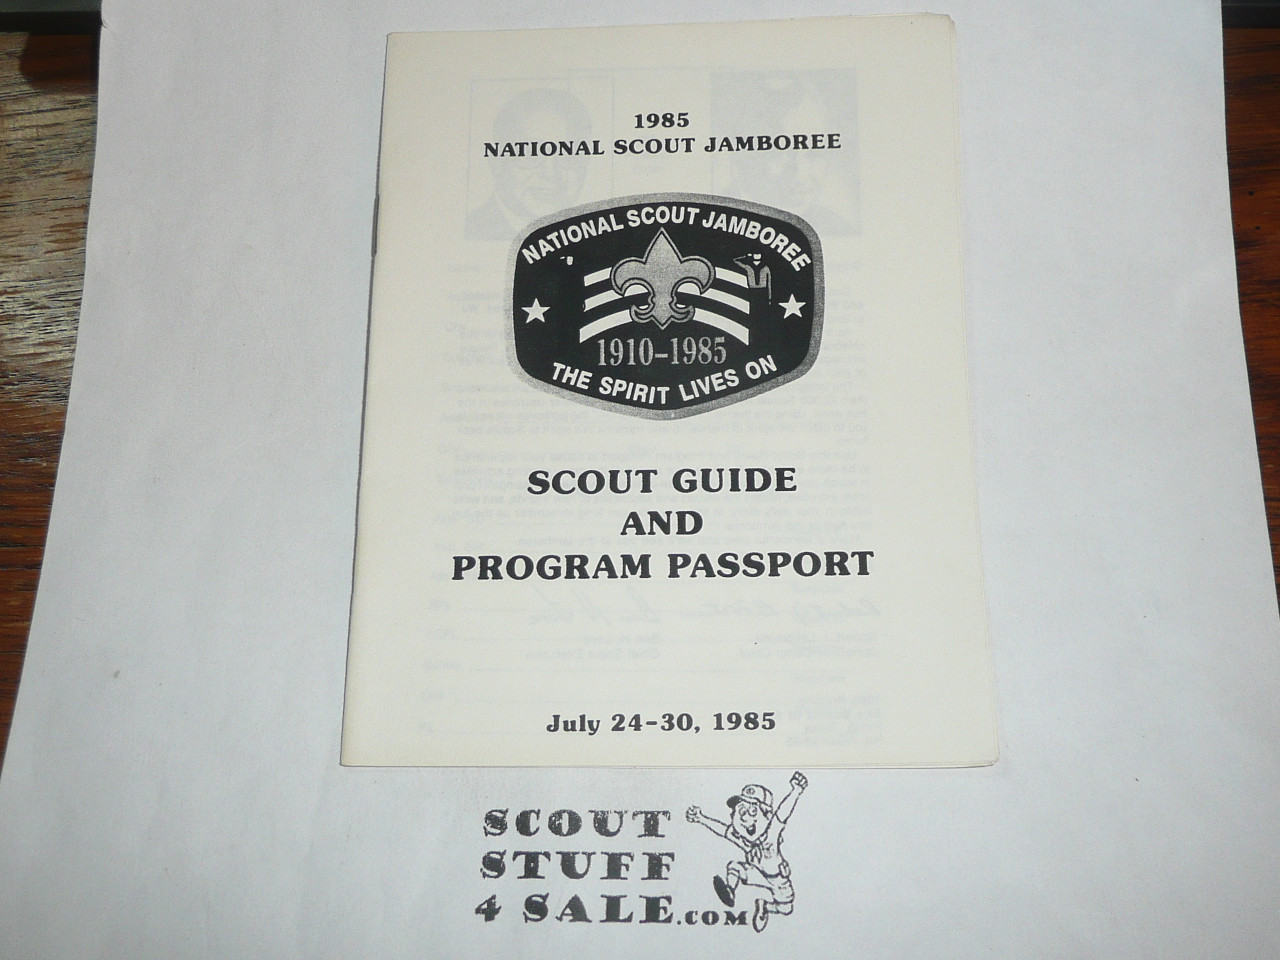 1985 National Jamboree Scout Guide and Program Passport, variety 2